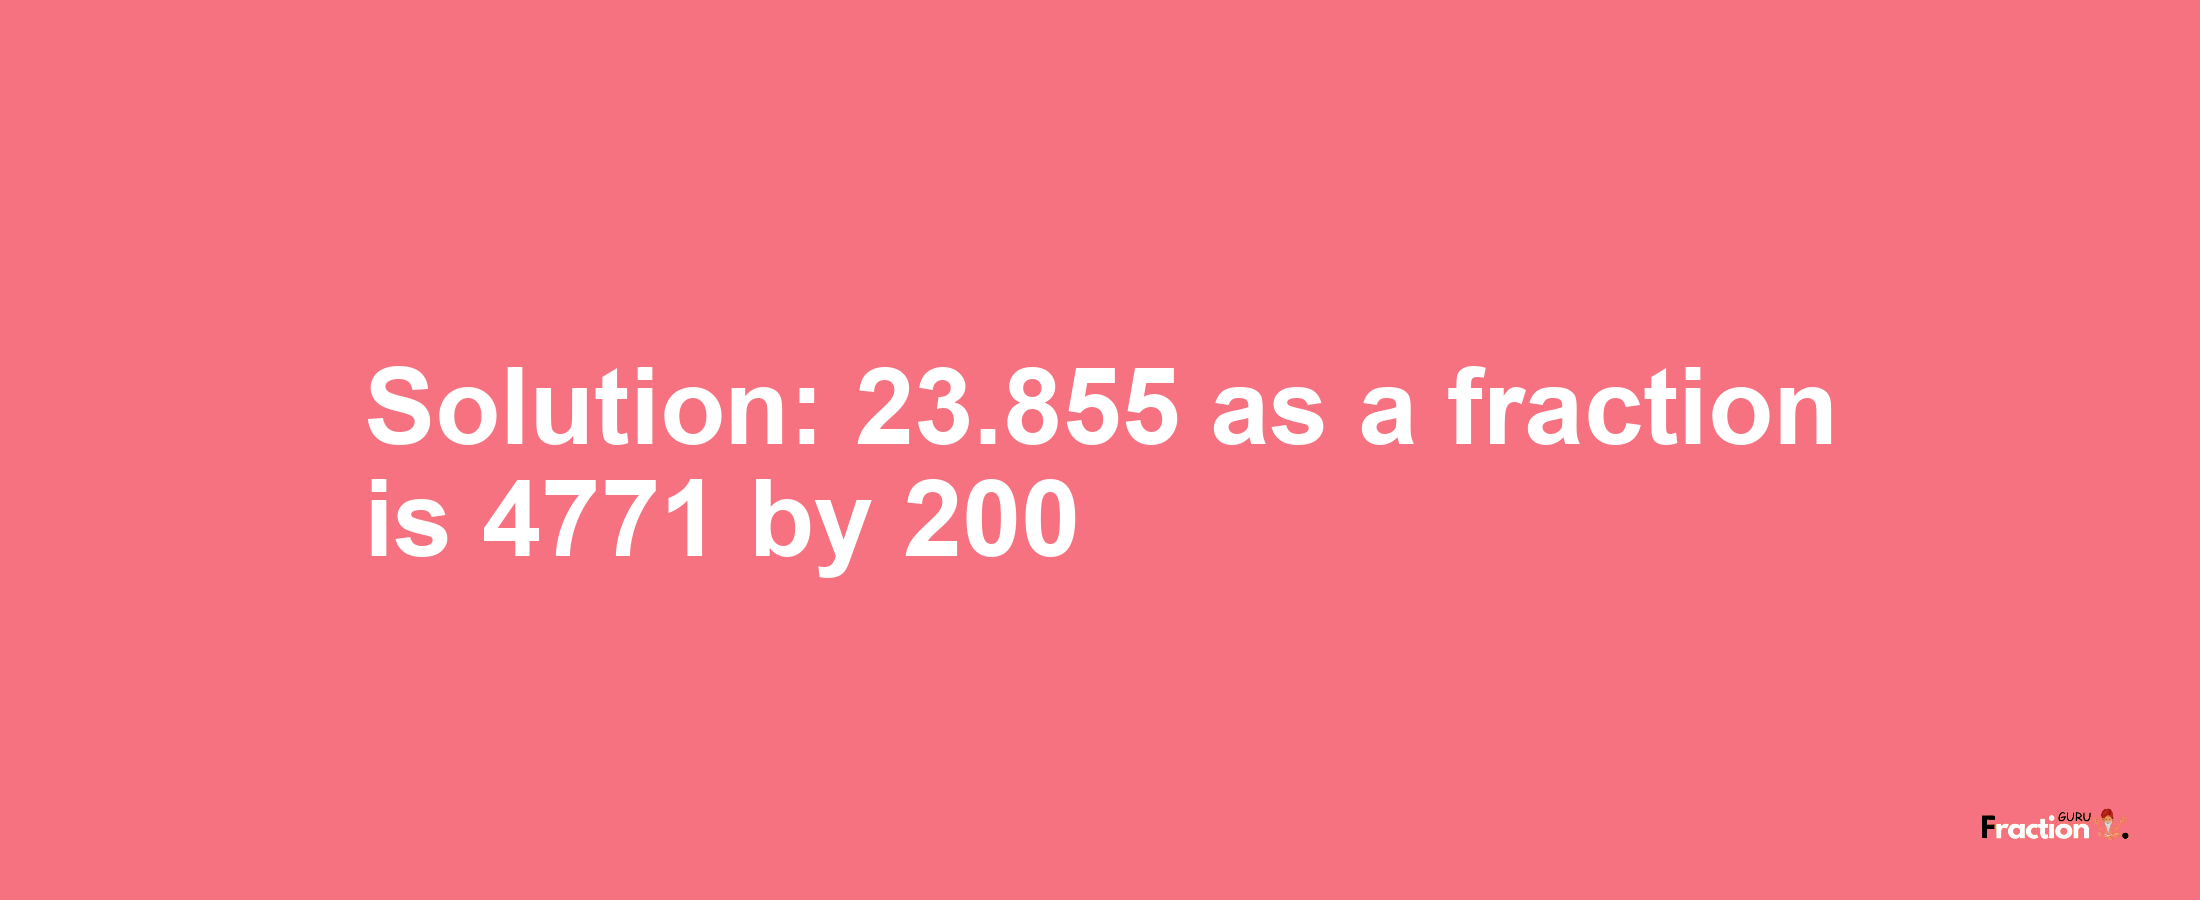 Solution:23.855 as a fraction is 4771/200